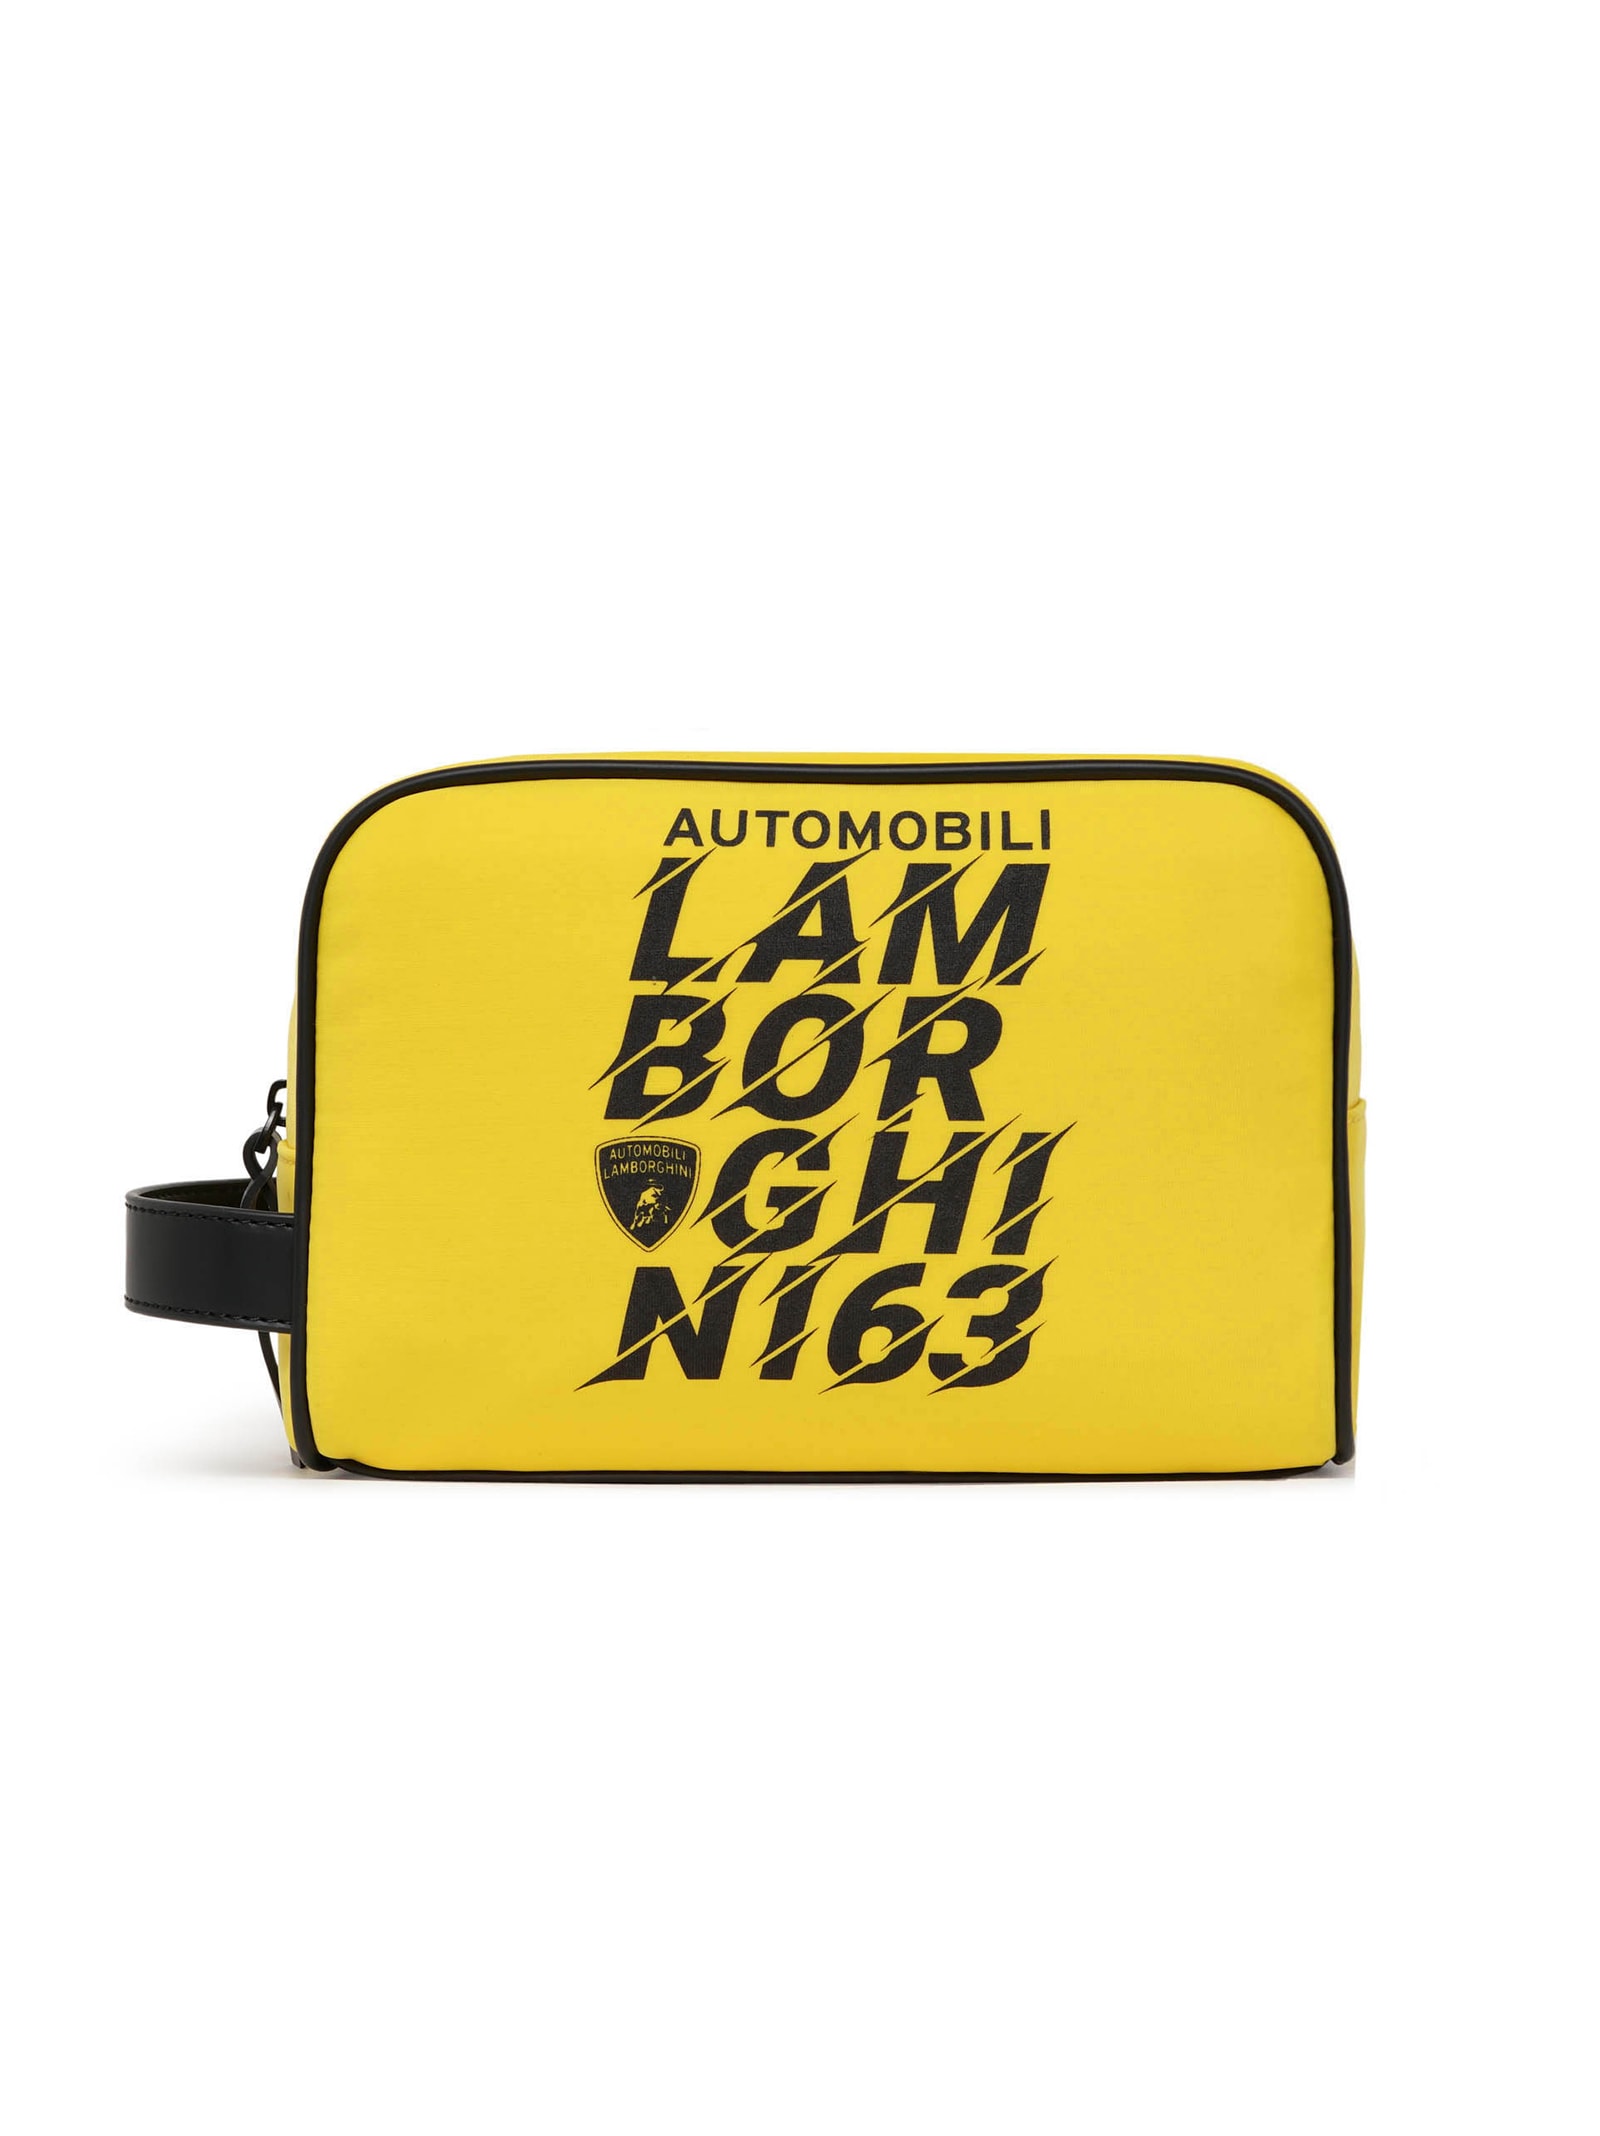 Automobili Lamborghini Into Yellow Travel Case With Contrasting Deconstructed Logo